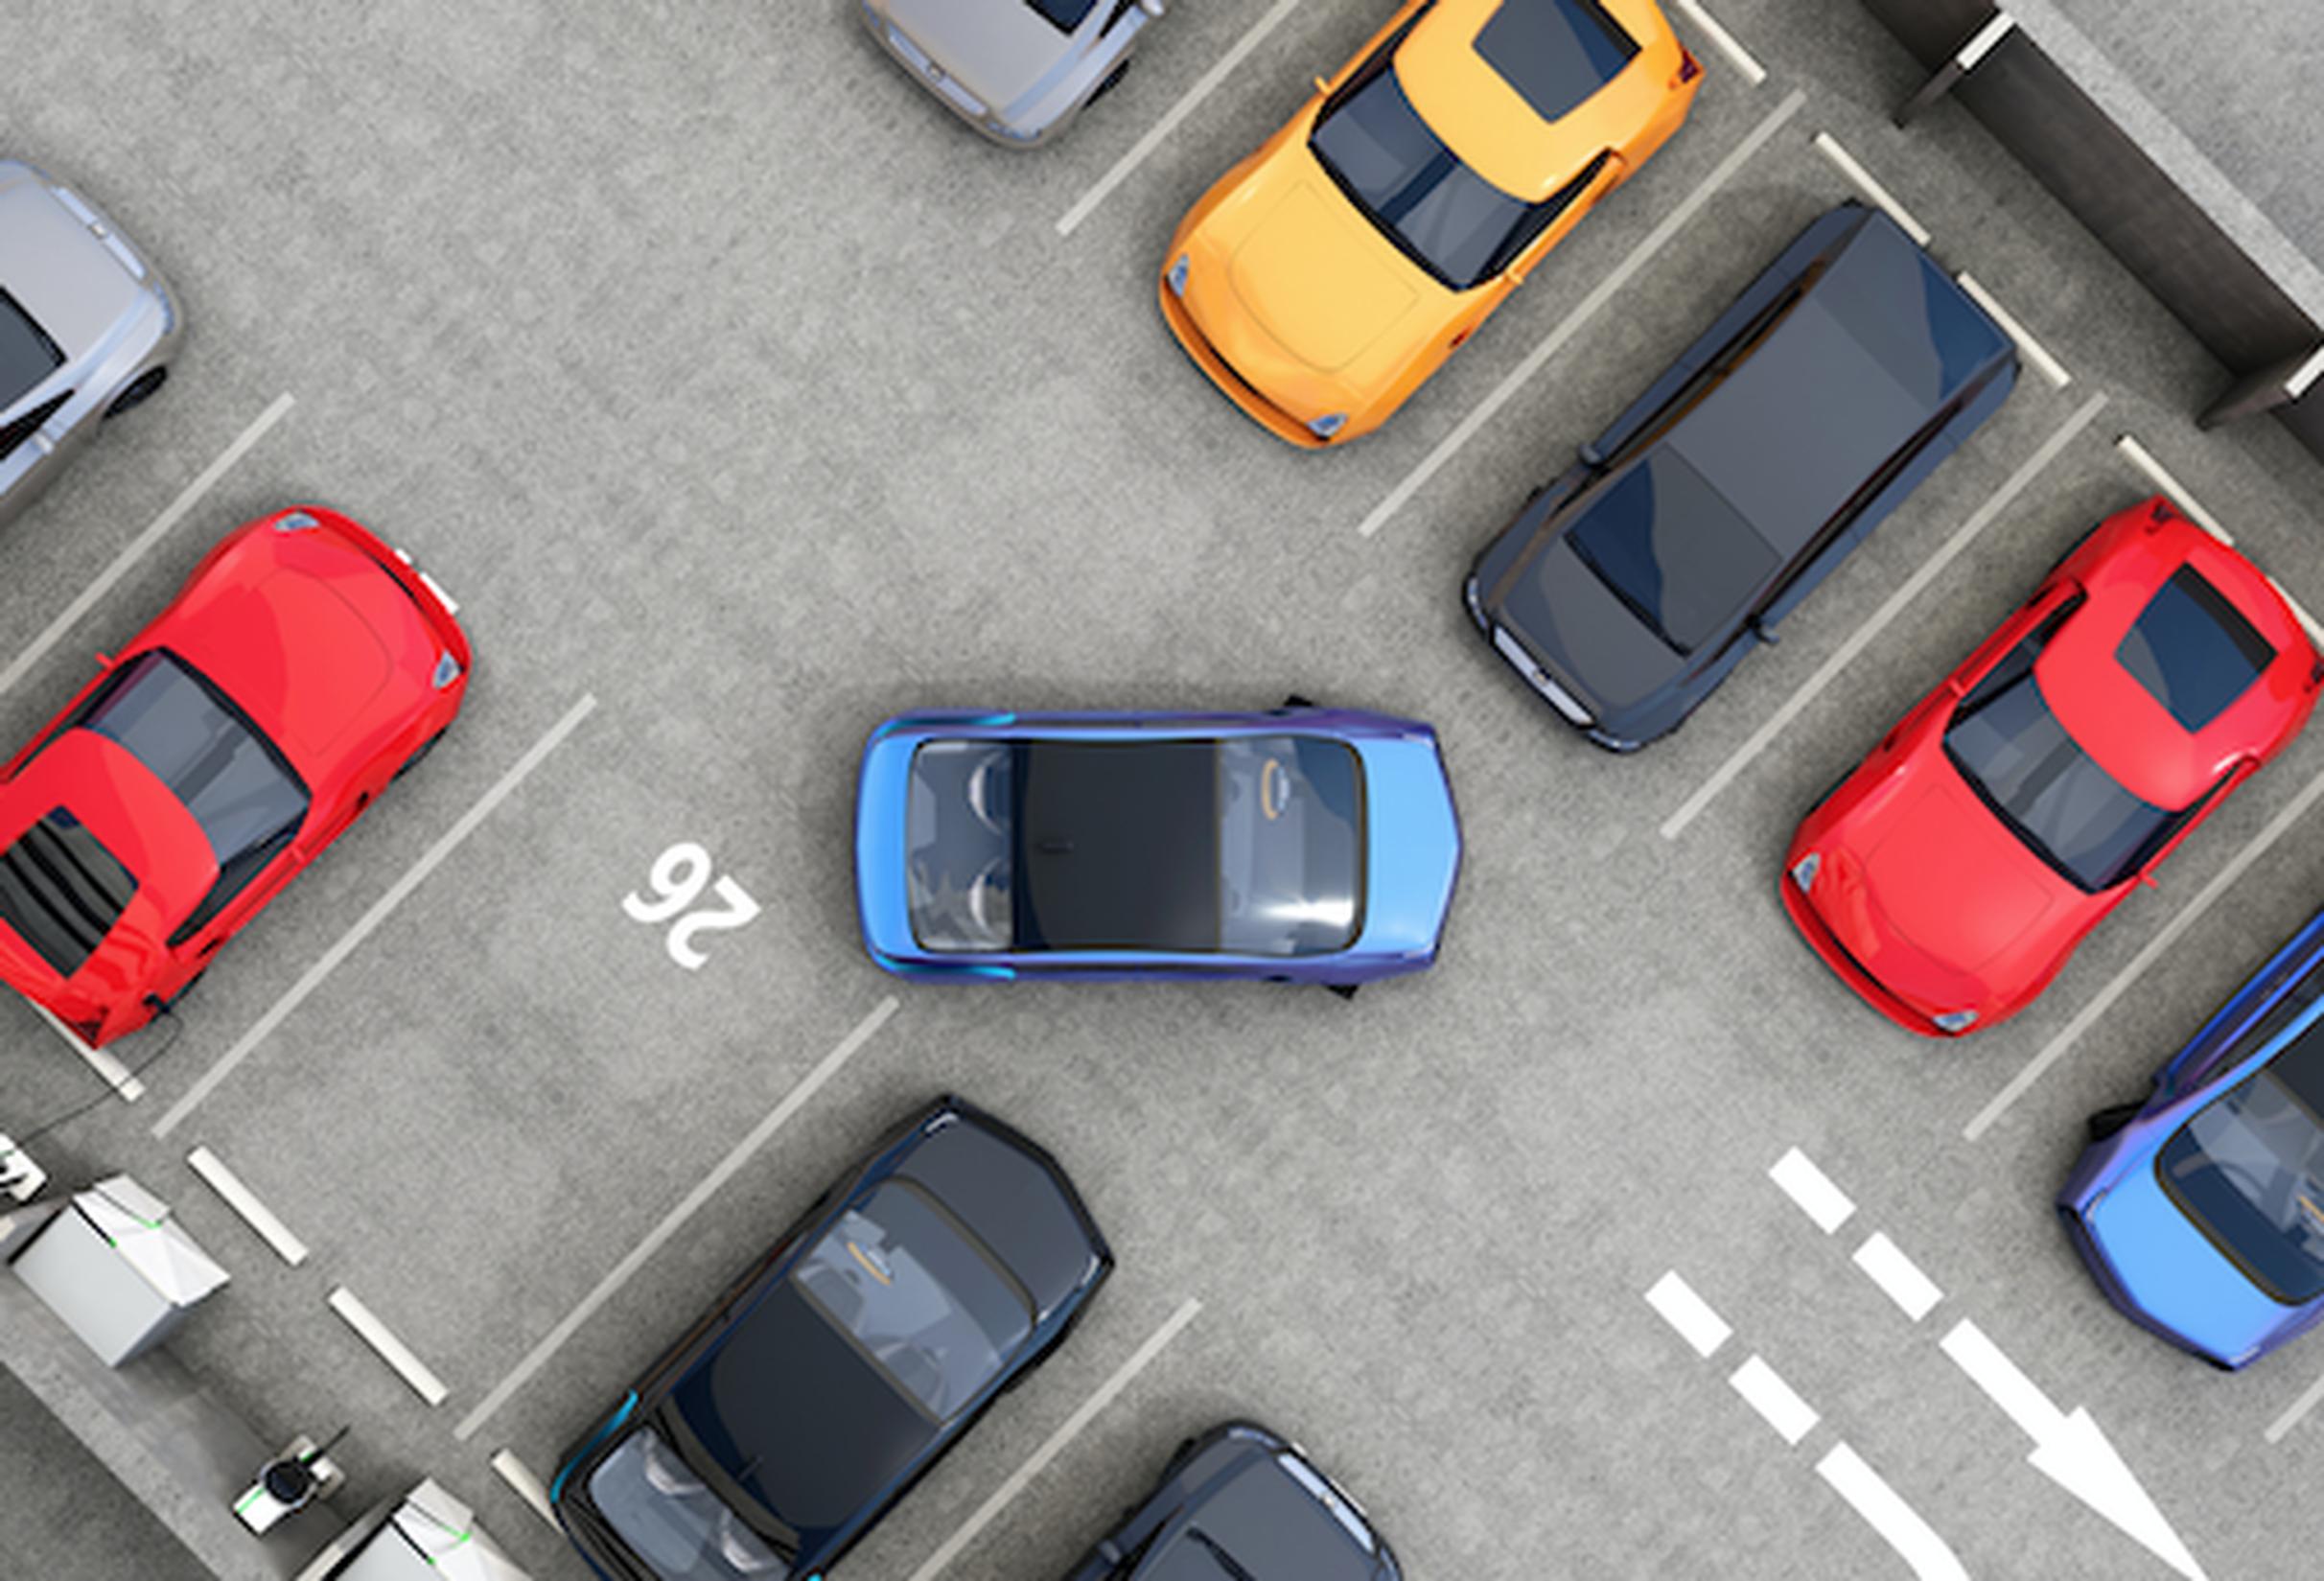 Steer Davies Gleave has partnered with KPMG to explore the potential impact of AVs on the parking sector